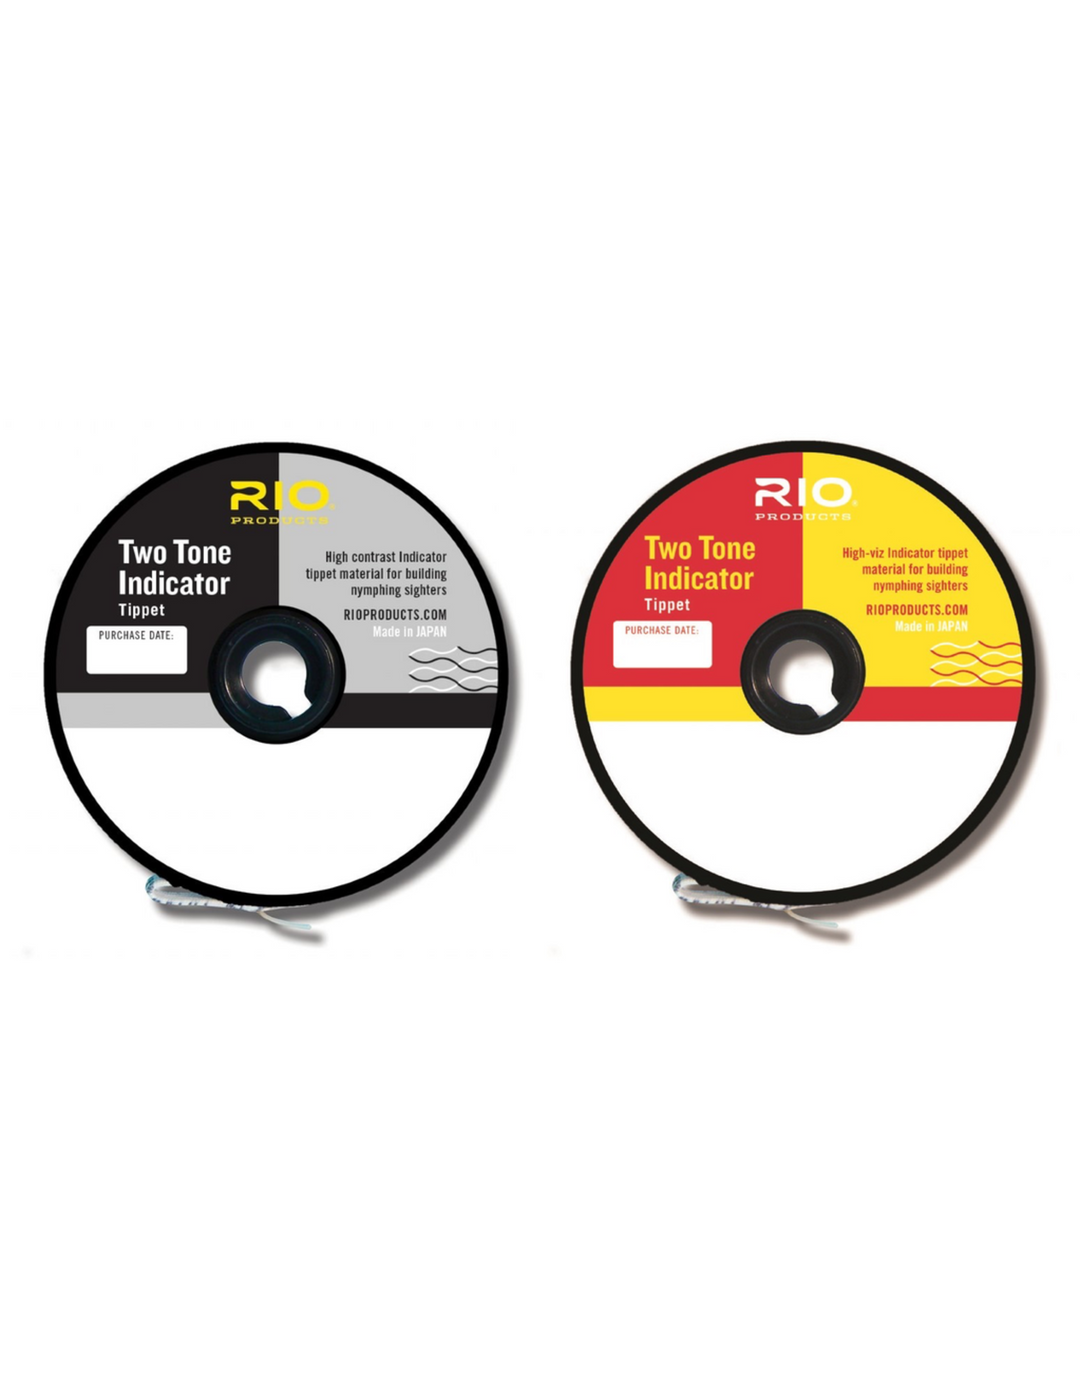 Rio Two-Tone Indicator Tippet